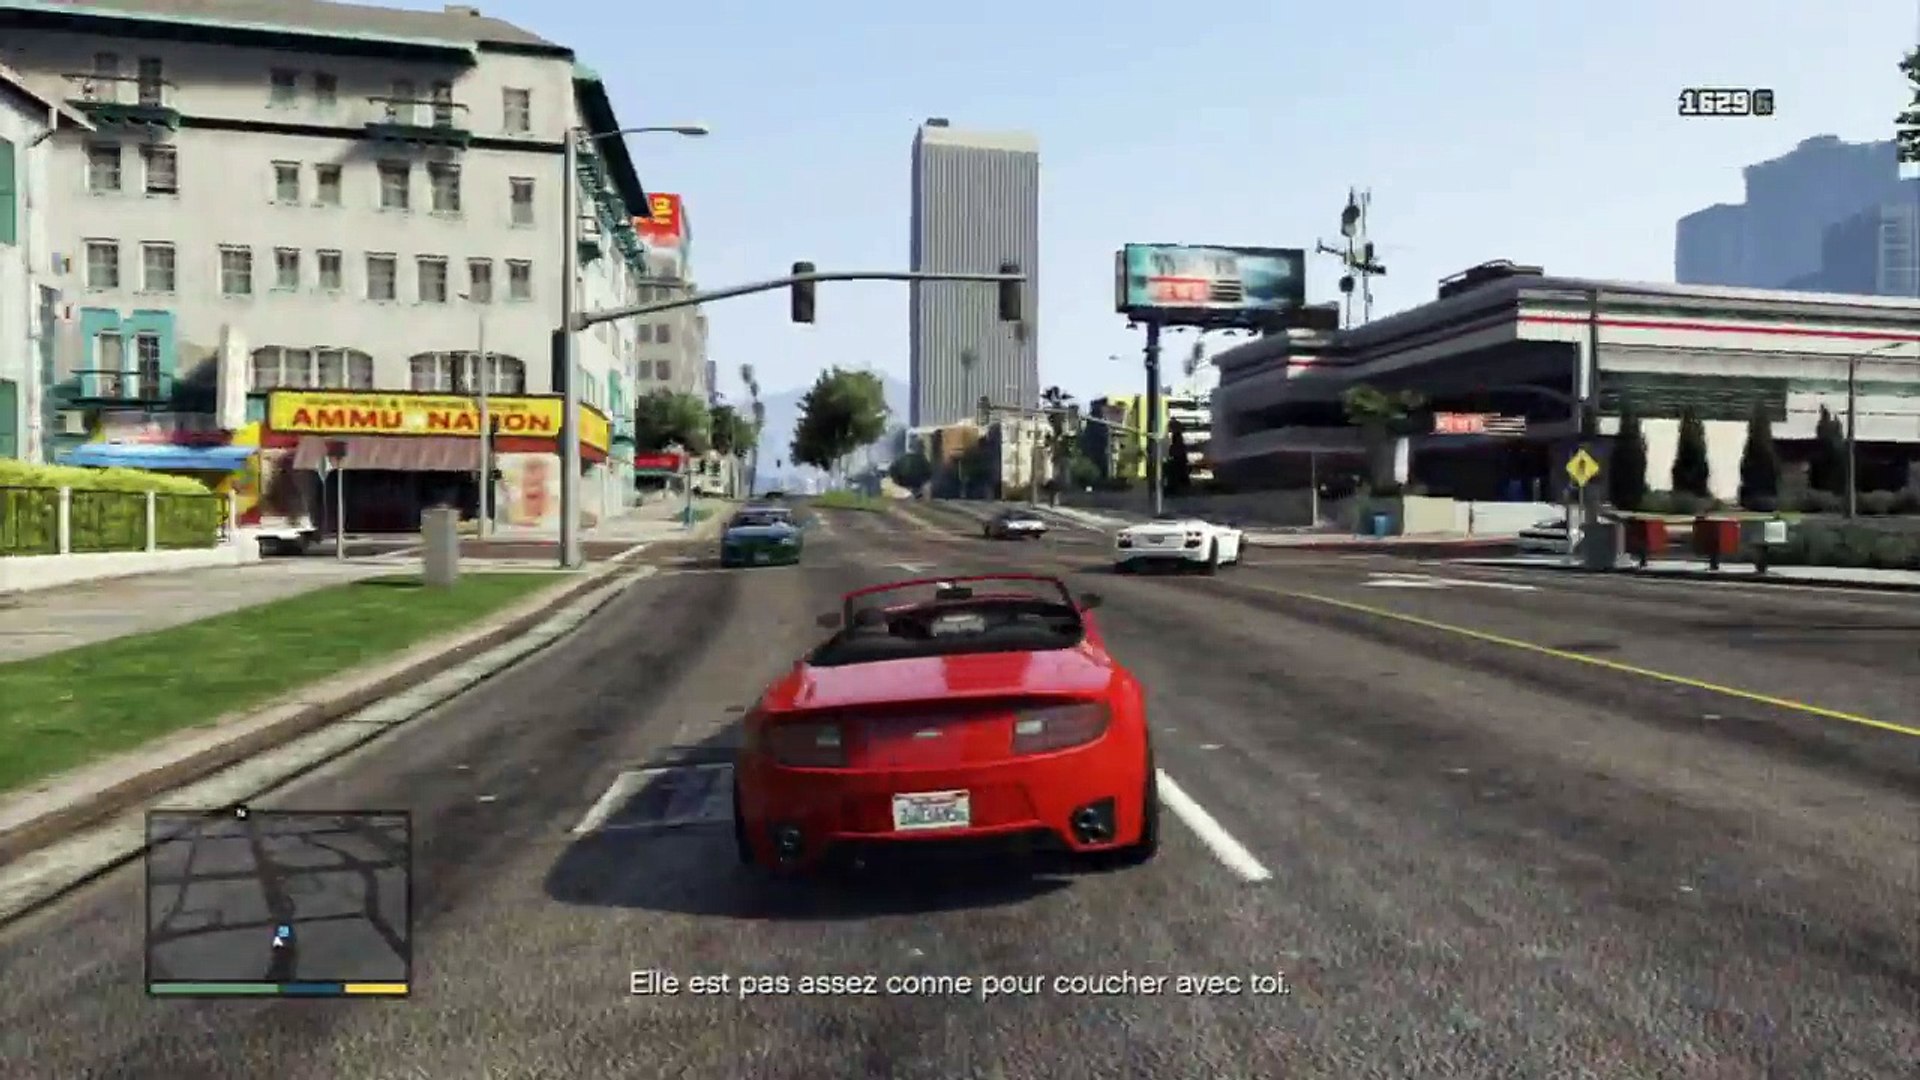 Extrait / Gameplay - GTA 5 (Gameplay Voiture Franklin - 1ère Mission) -  Vidéo Dailymotion